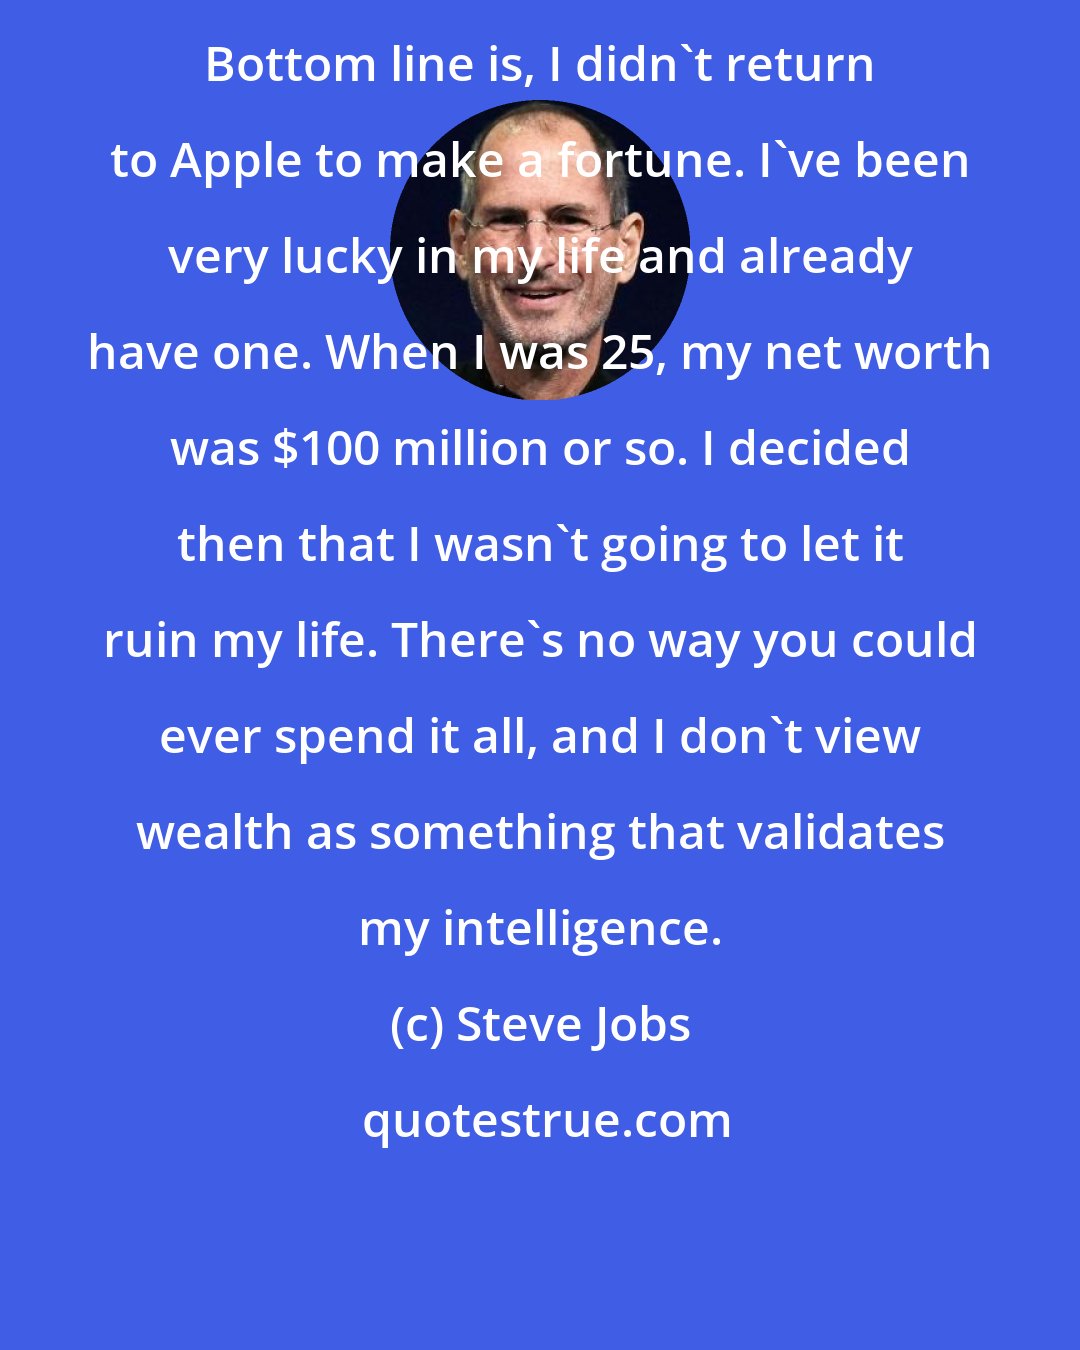 Steve Jobs: Bottom line is, I didn't return to Apple to make a fortune. I've been very lucky in my life and already have one. When I was 25, my net worth was $100 million or so. I decided then that I wasn't going to let it ruin my life. There's no way you could ever spend it all, and I don't view wealth as something that validates my intelligence.